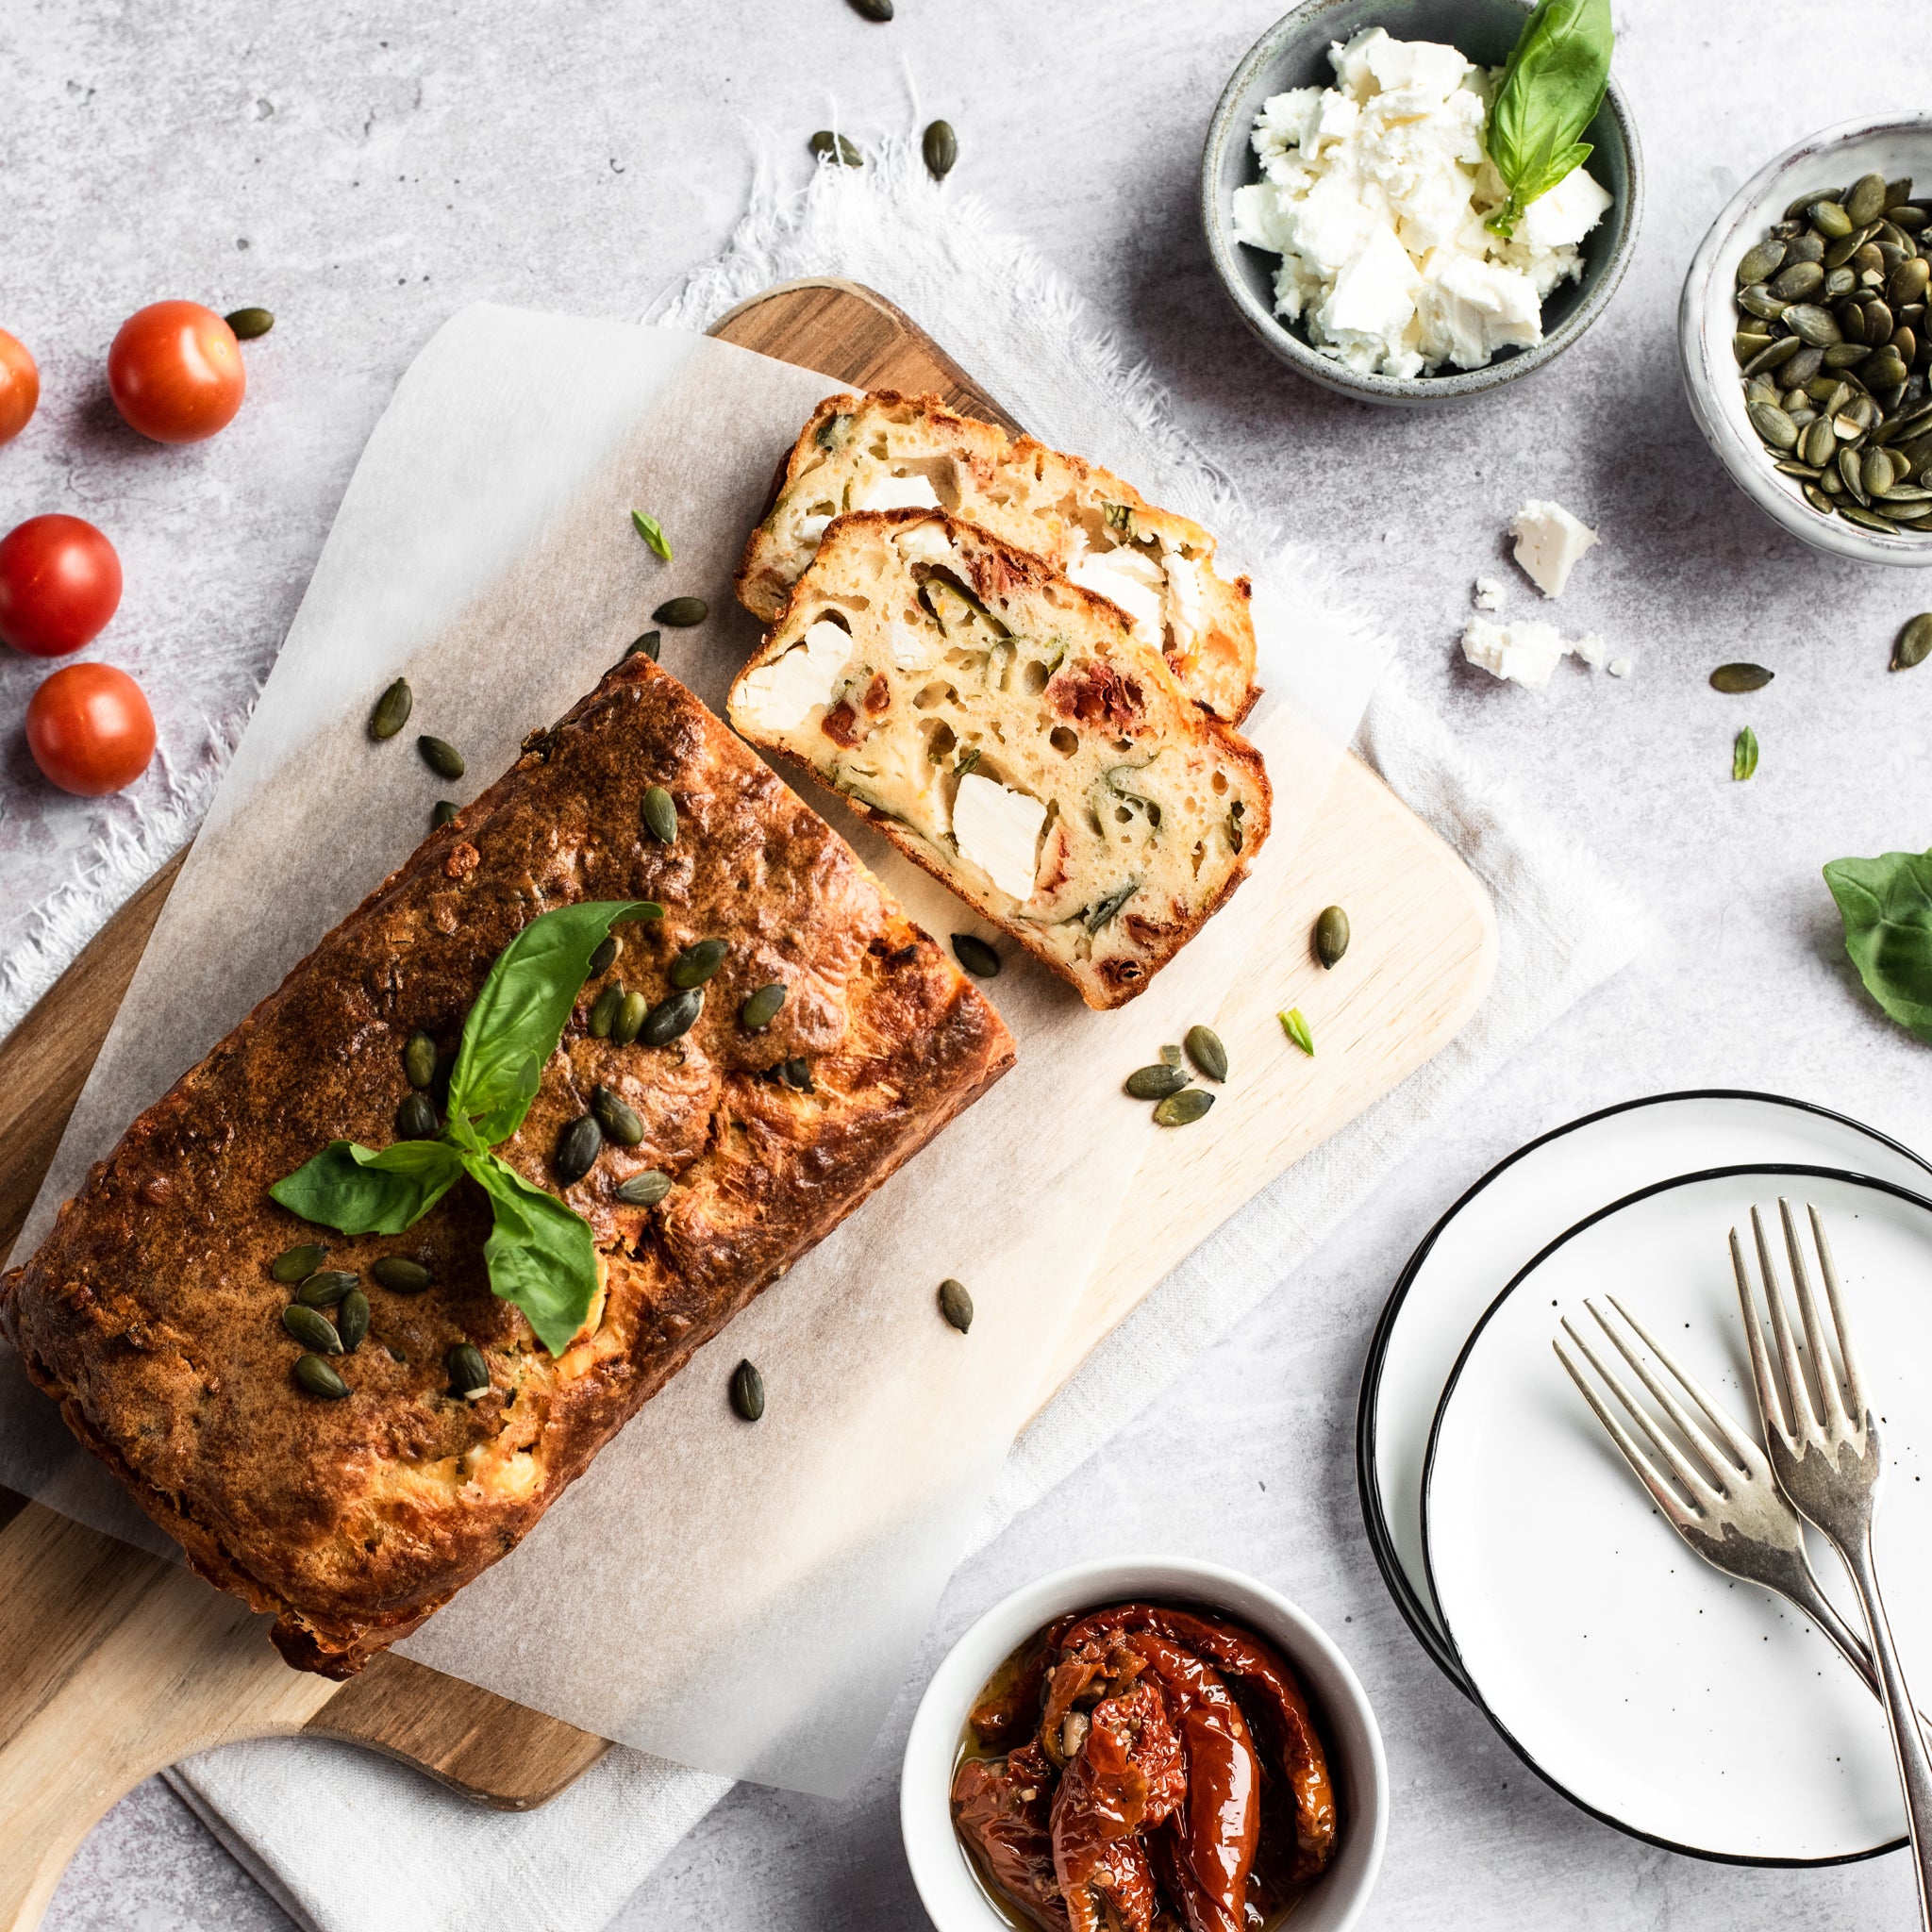 Feta and tomato loaf with slice removed on a chopping board